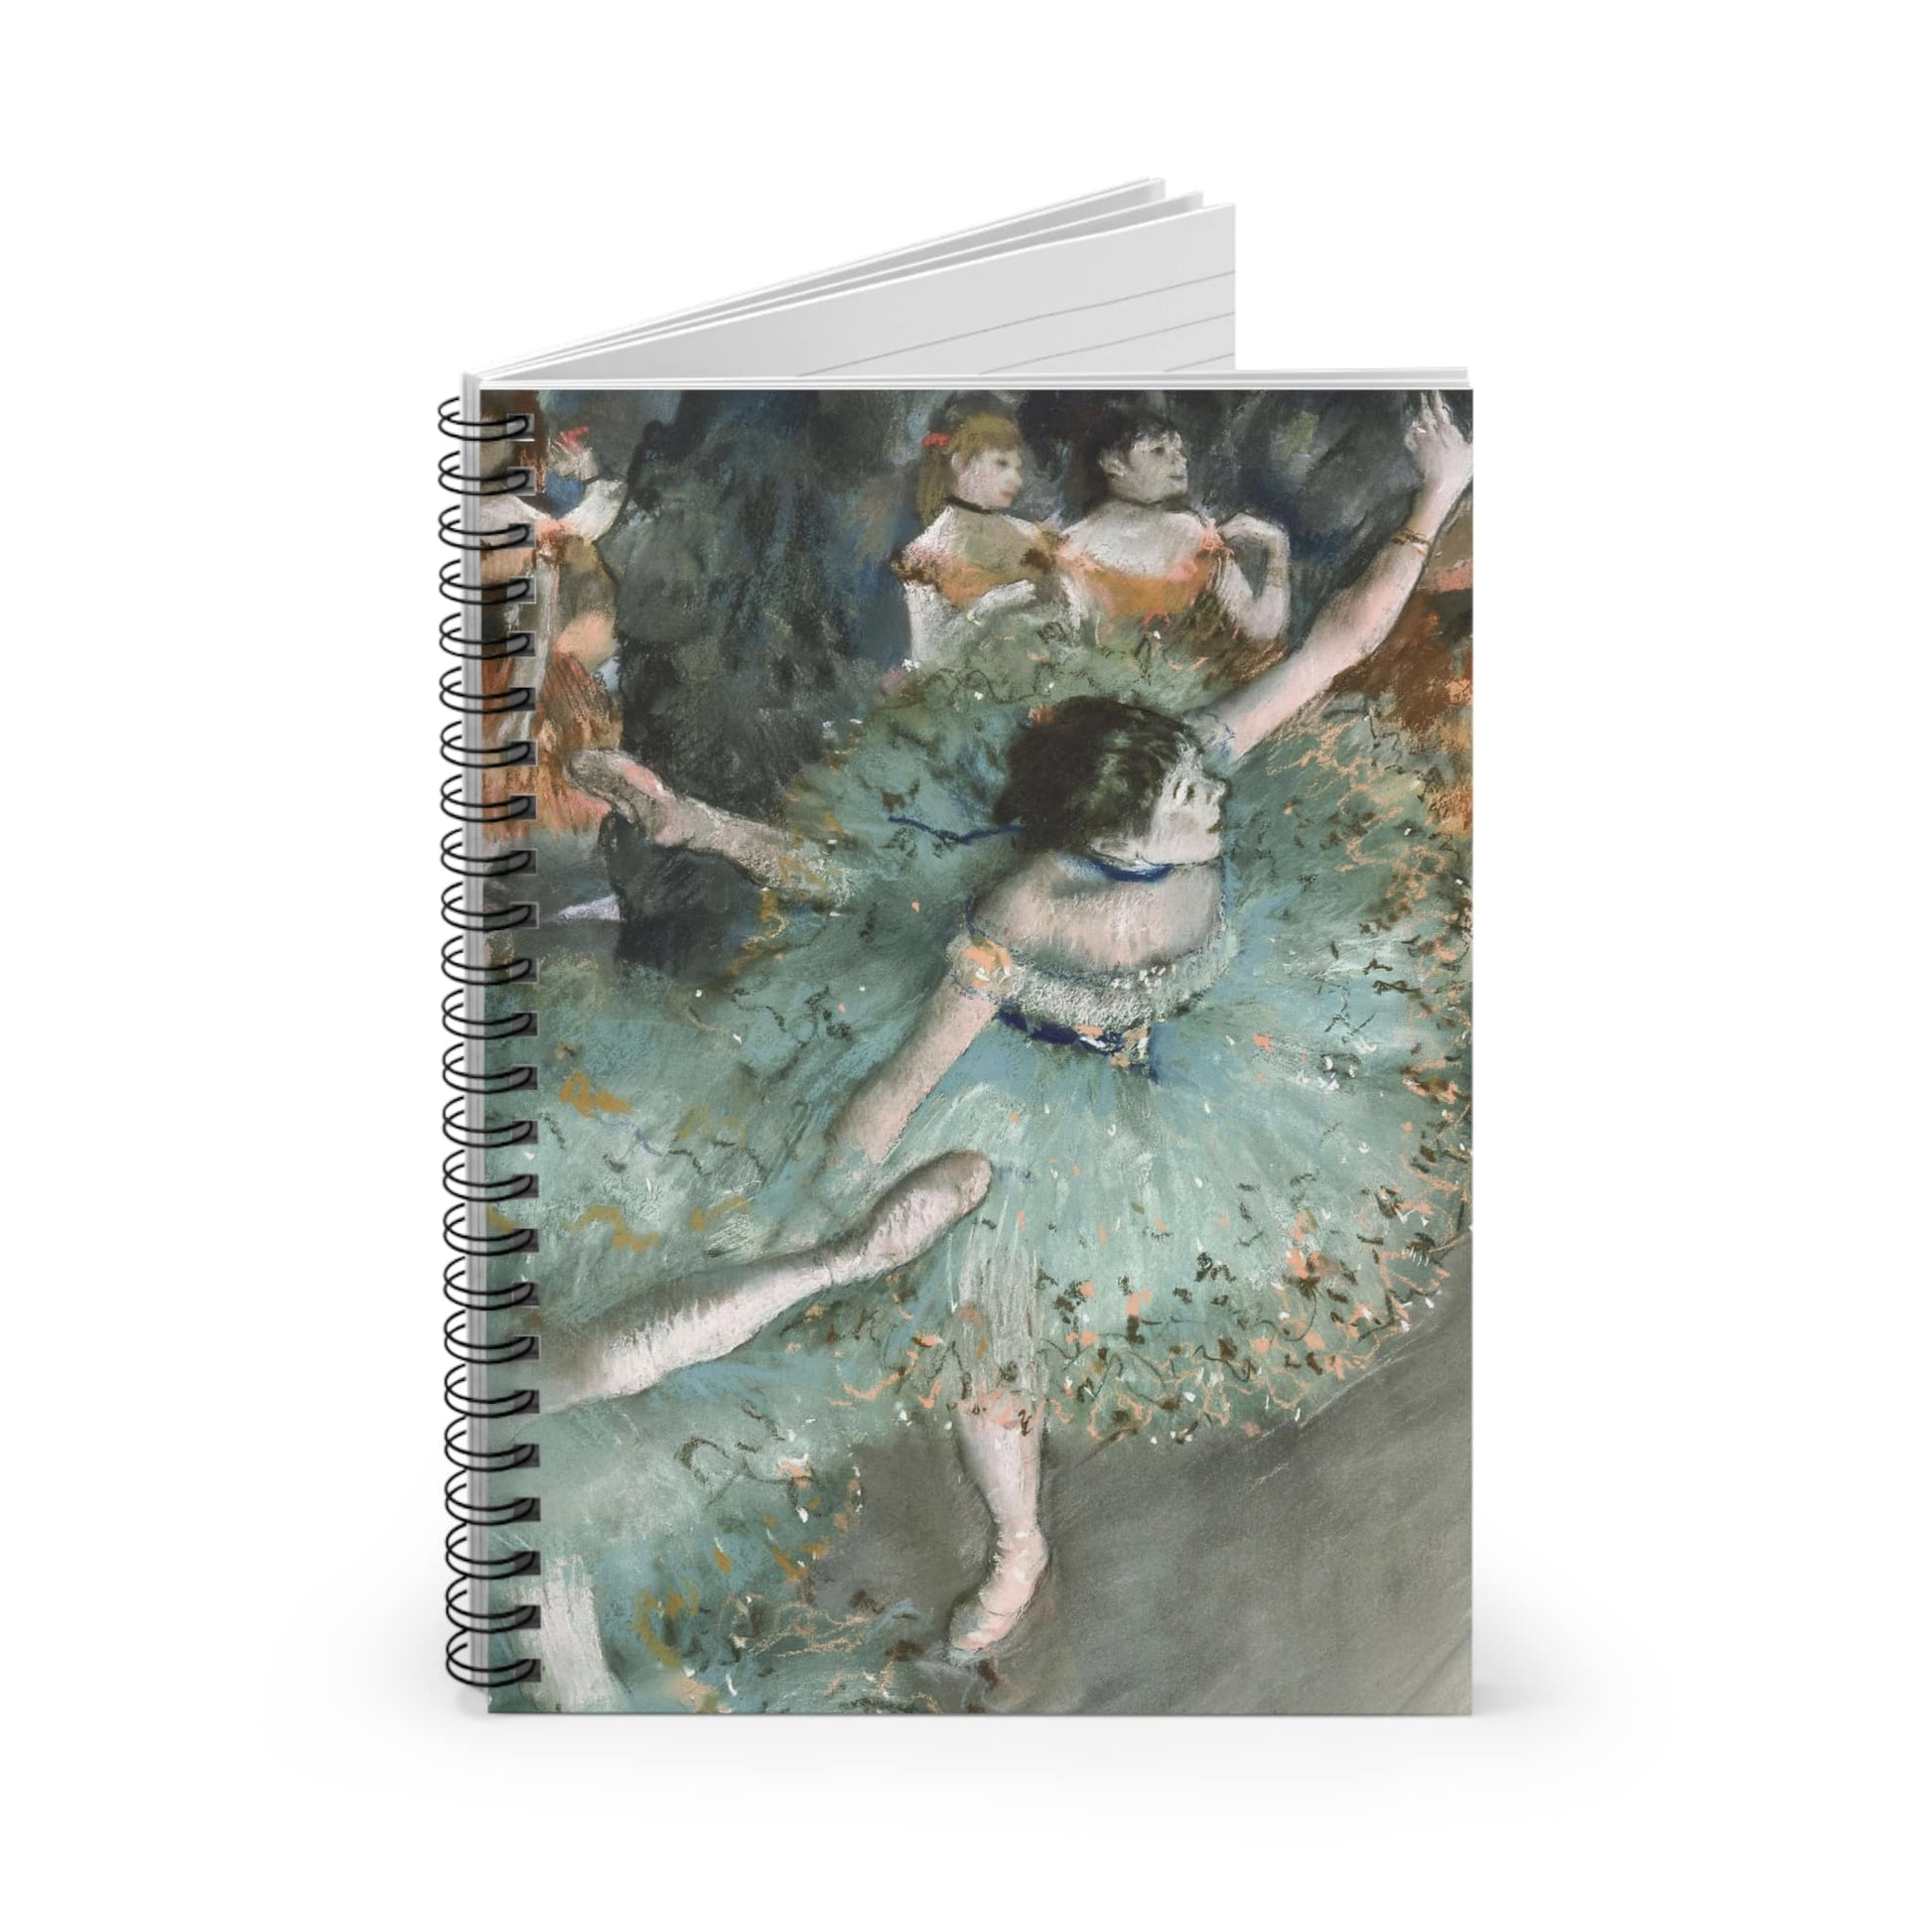 Ballet Painting Spiral Notebook Standing up on White Desk